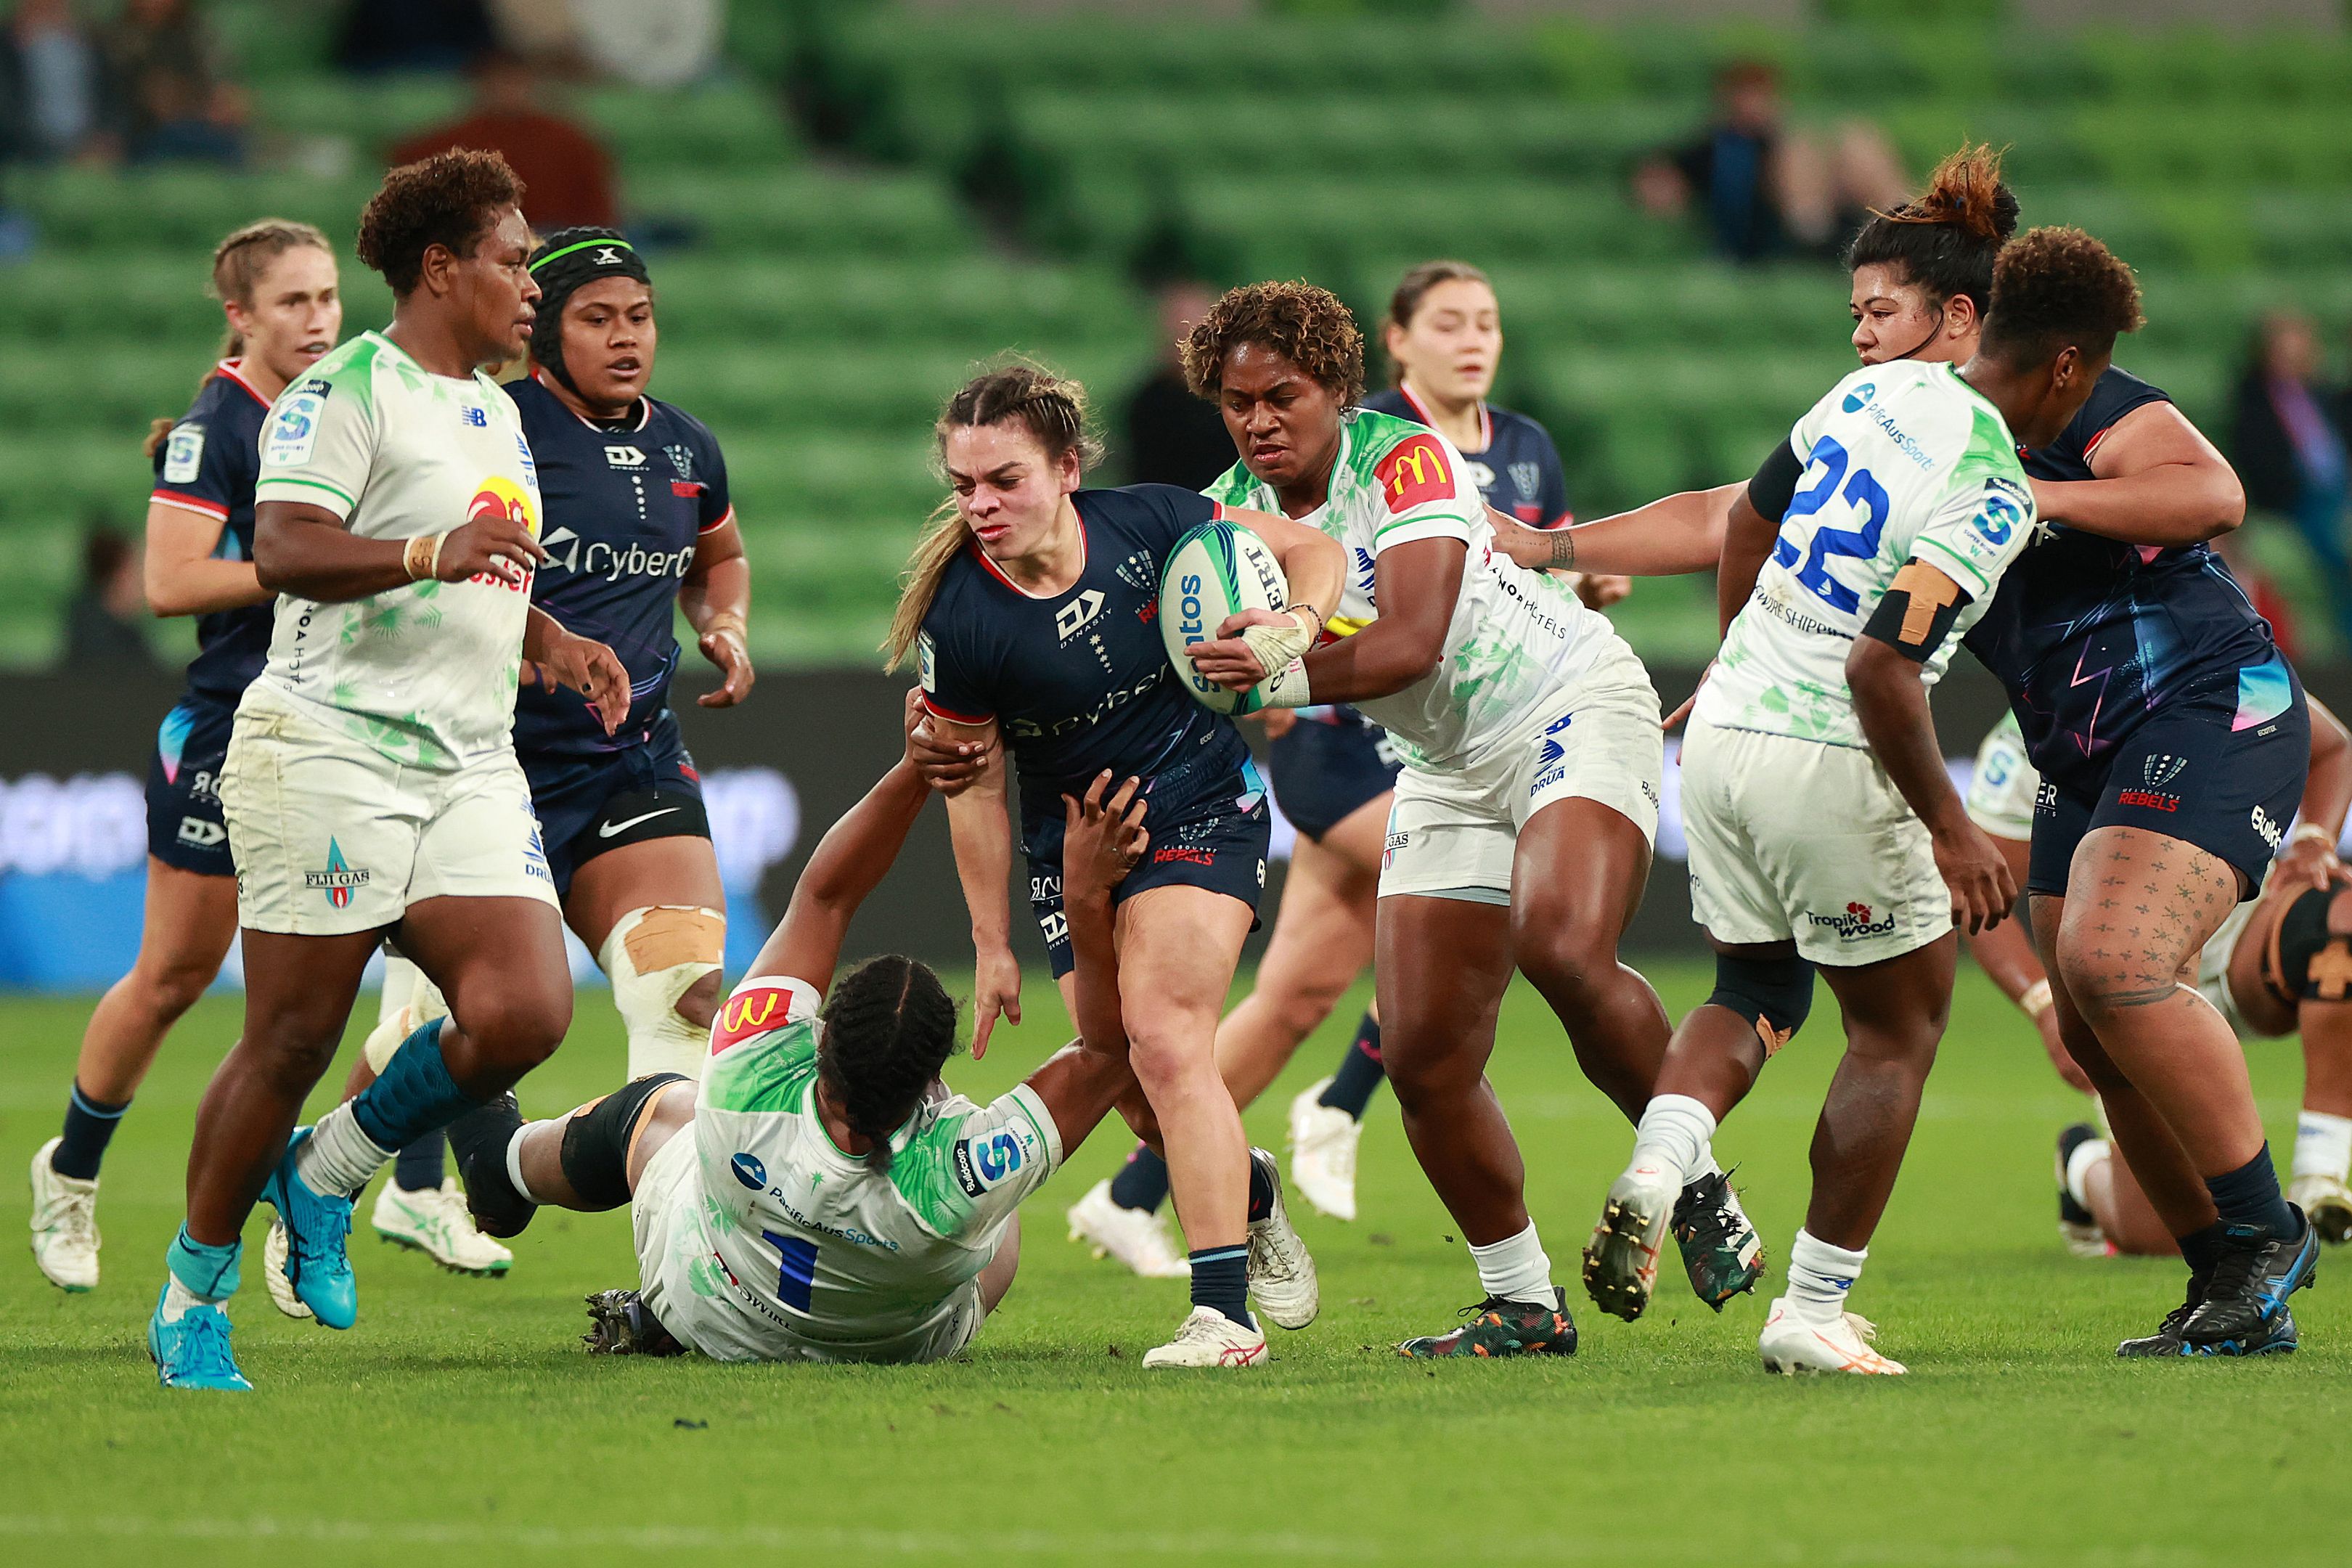 EXCLUSIVE: Renewed calls for women's Super Rugby competitions to merge and 'play more often'